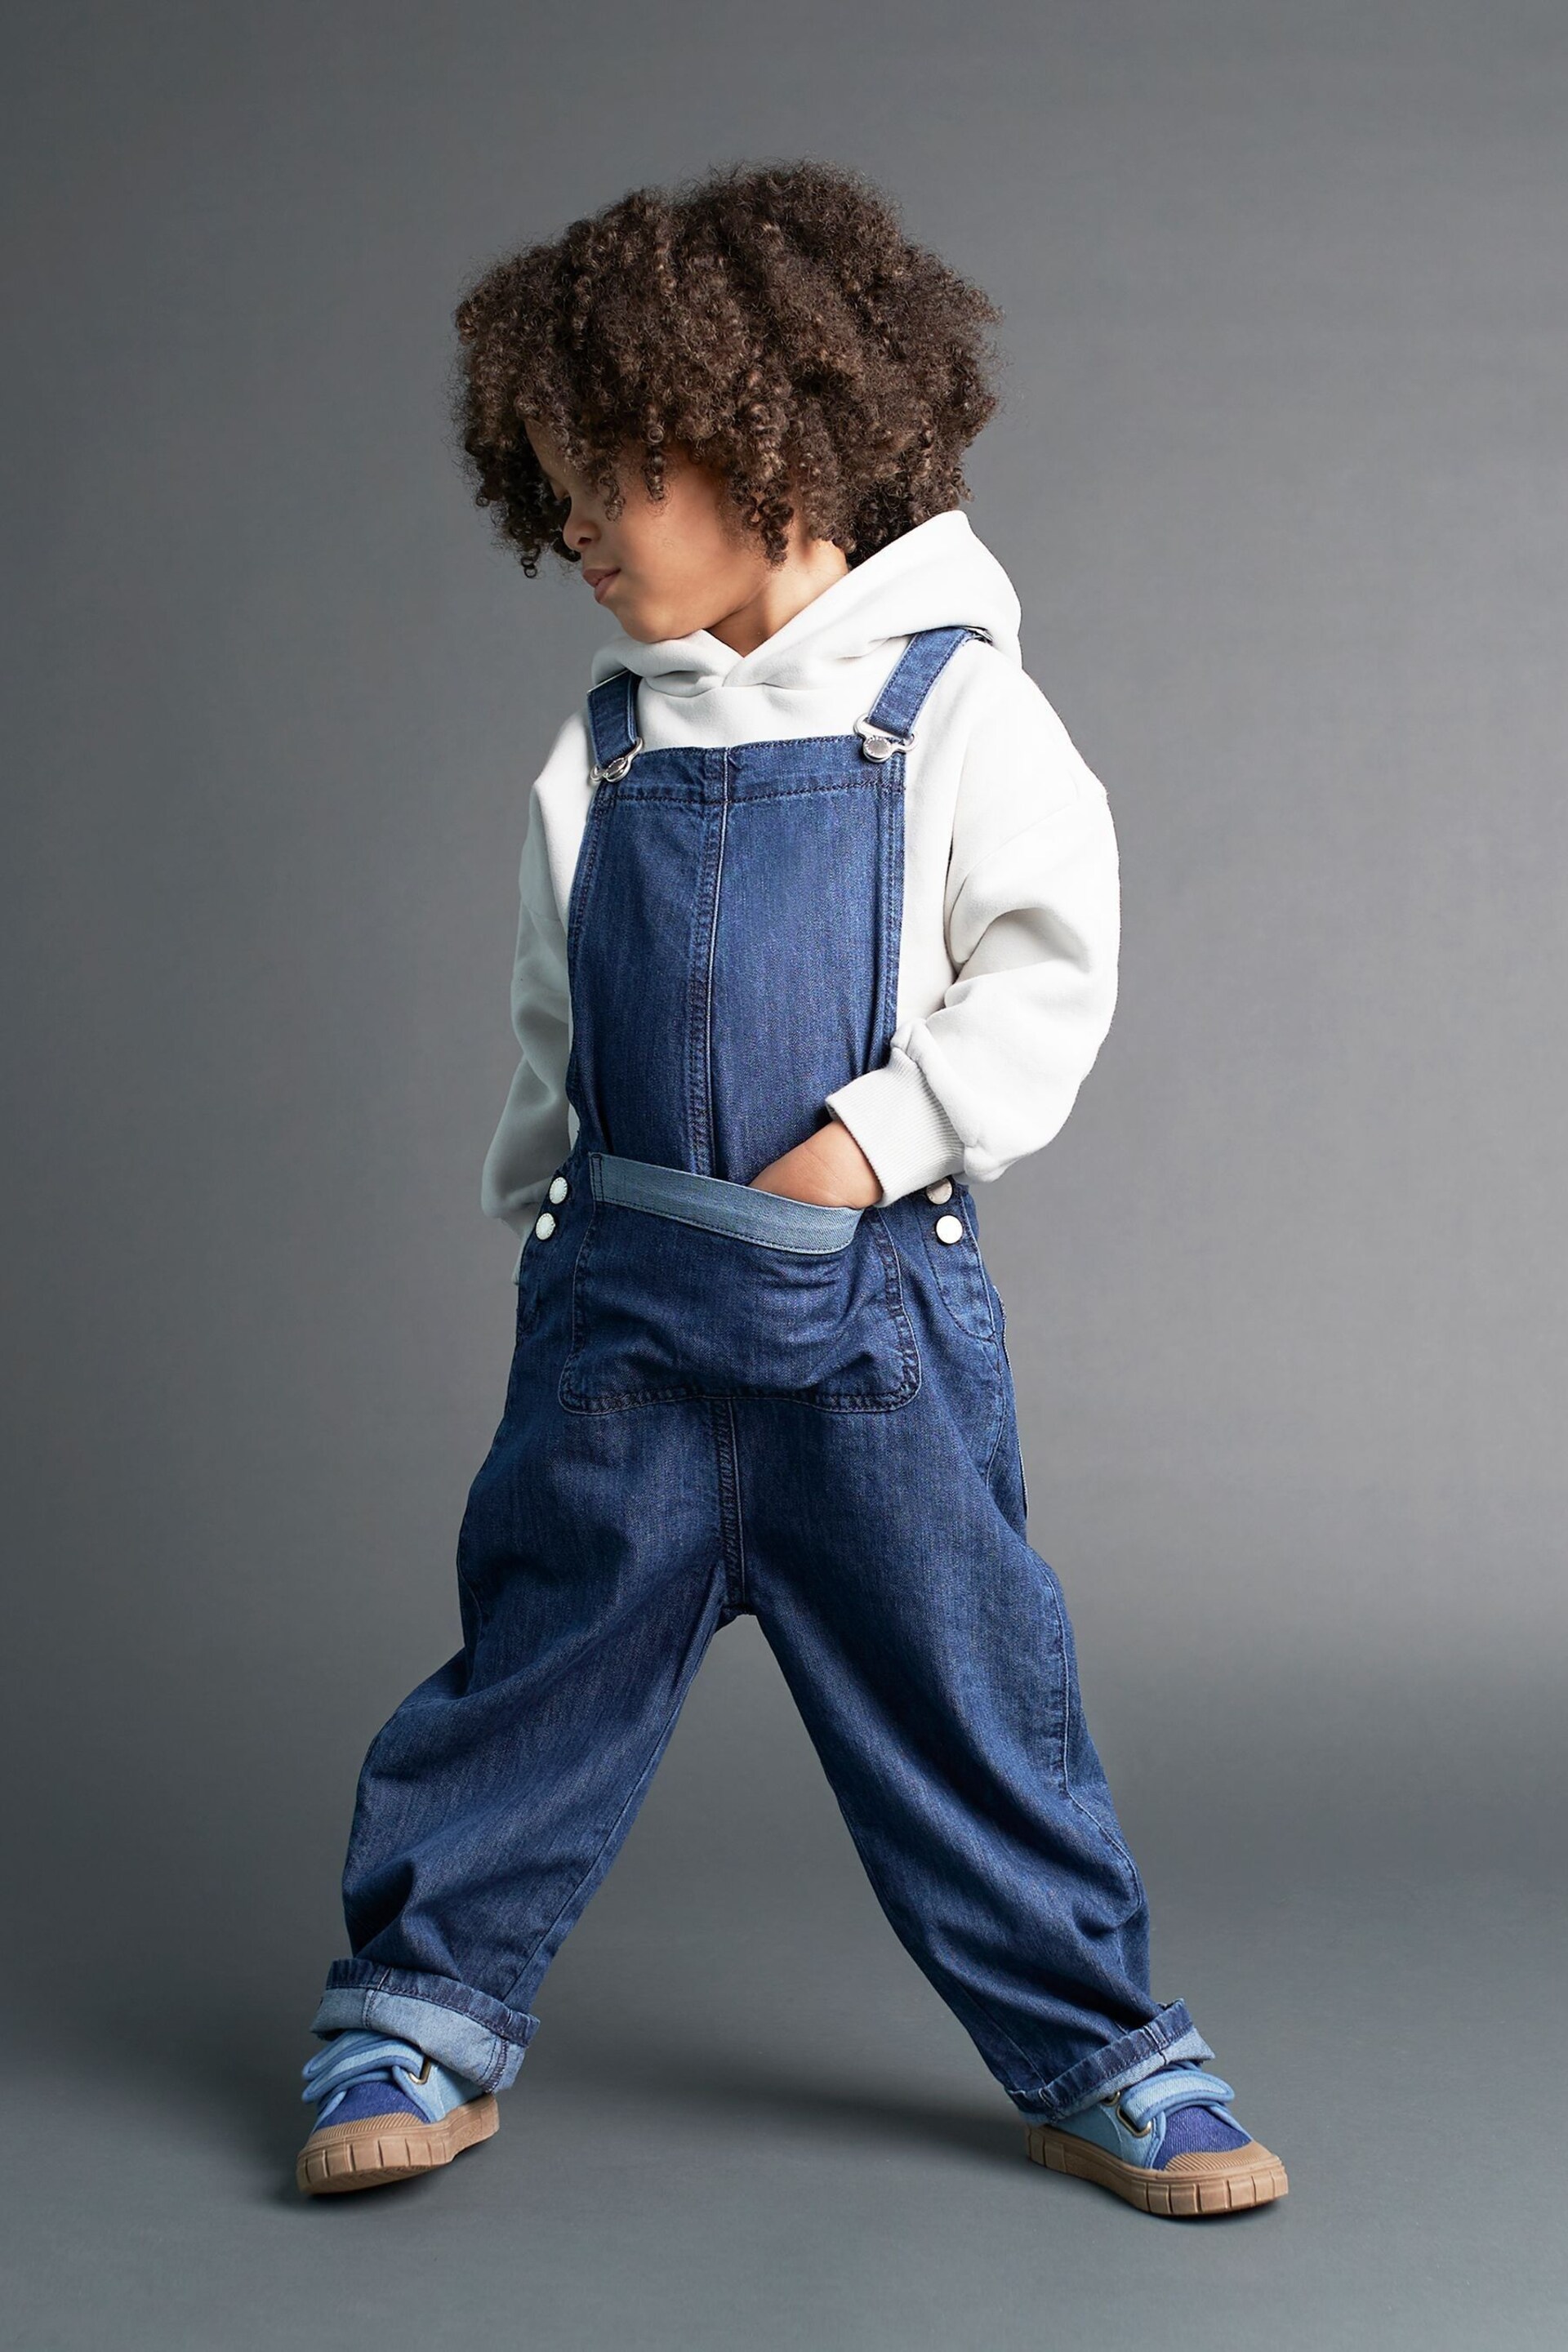 KIDLY Blue Dungarees - Image 1 of 7